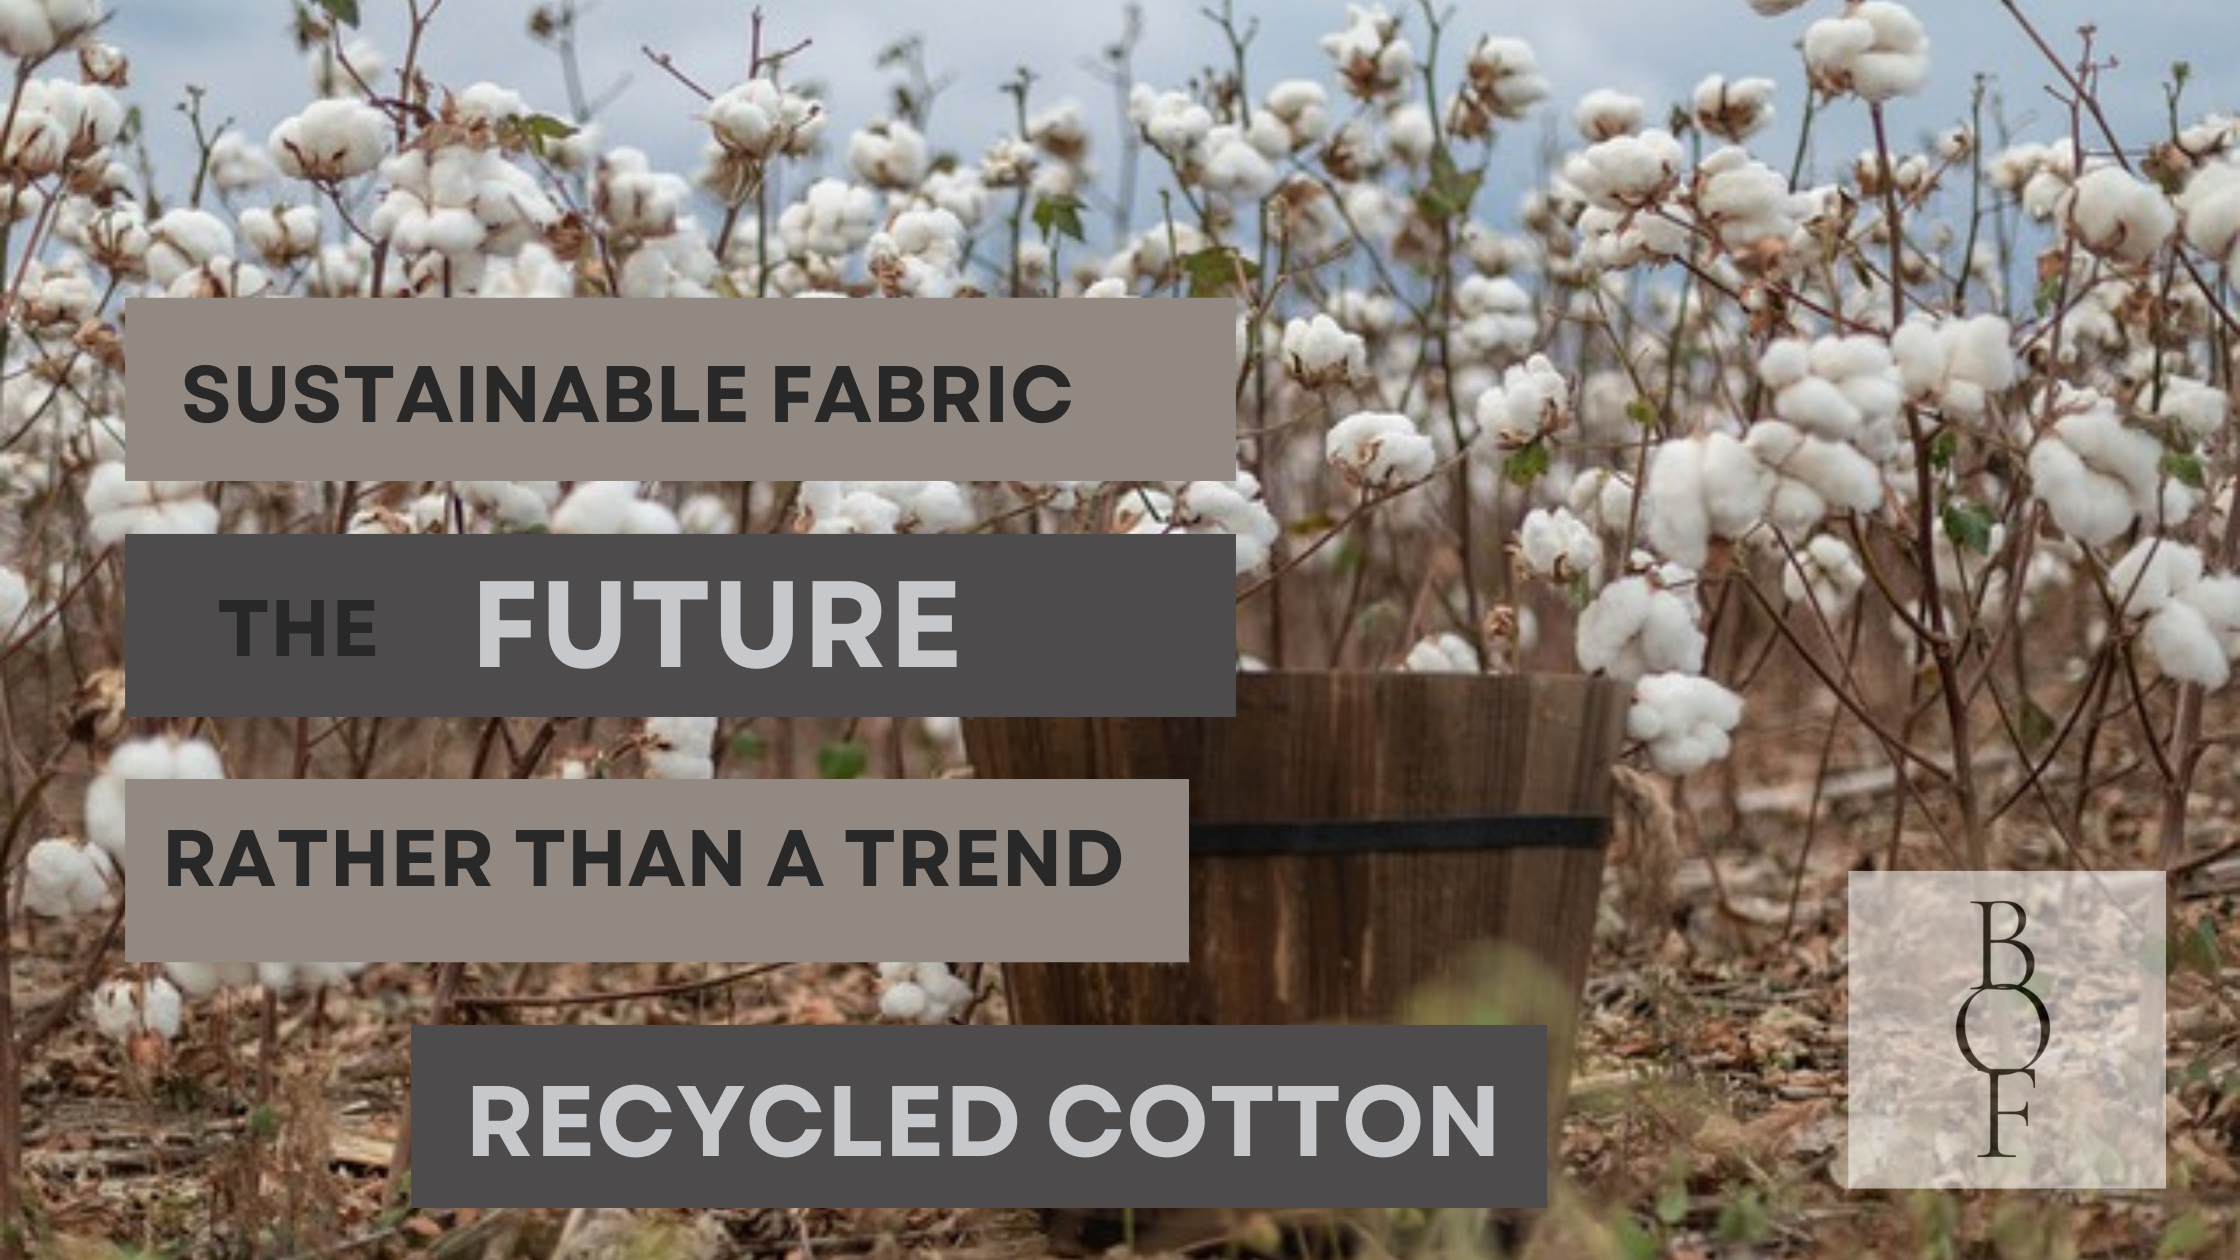 Recycled Cotton – Sustainable Fabric: What Is It and Why It Matters